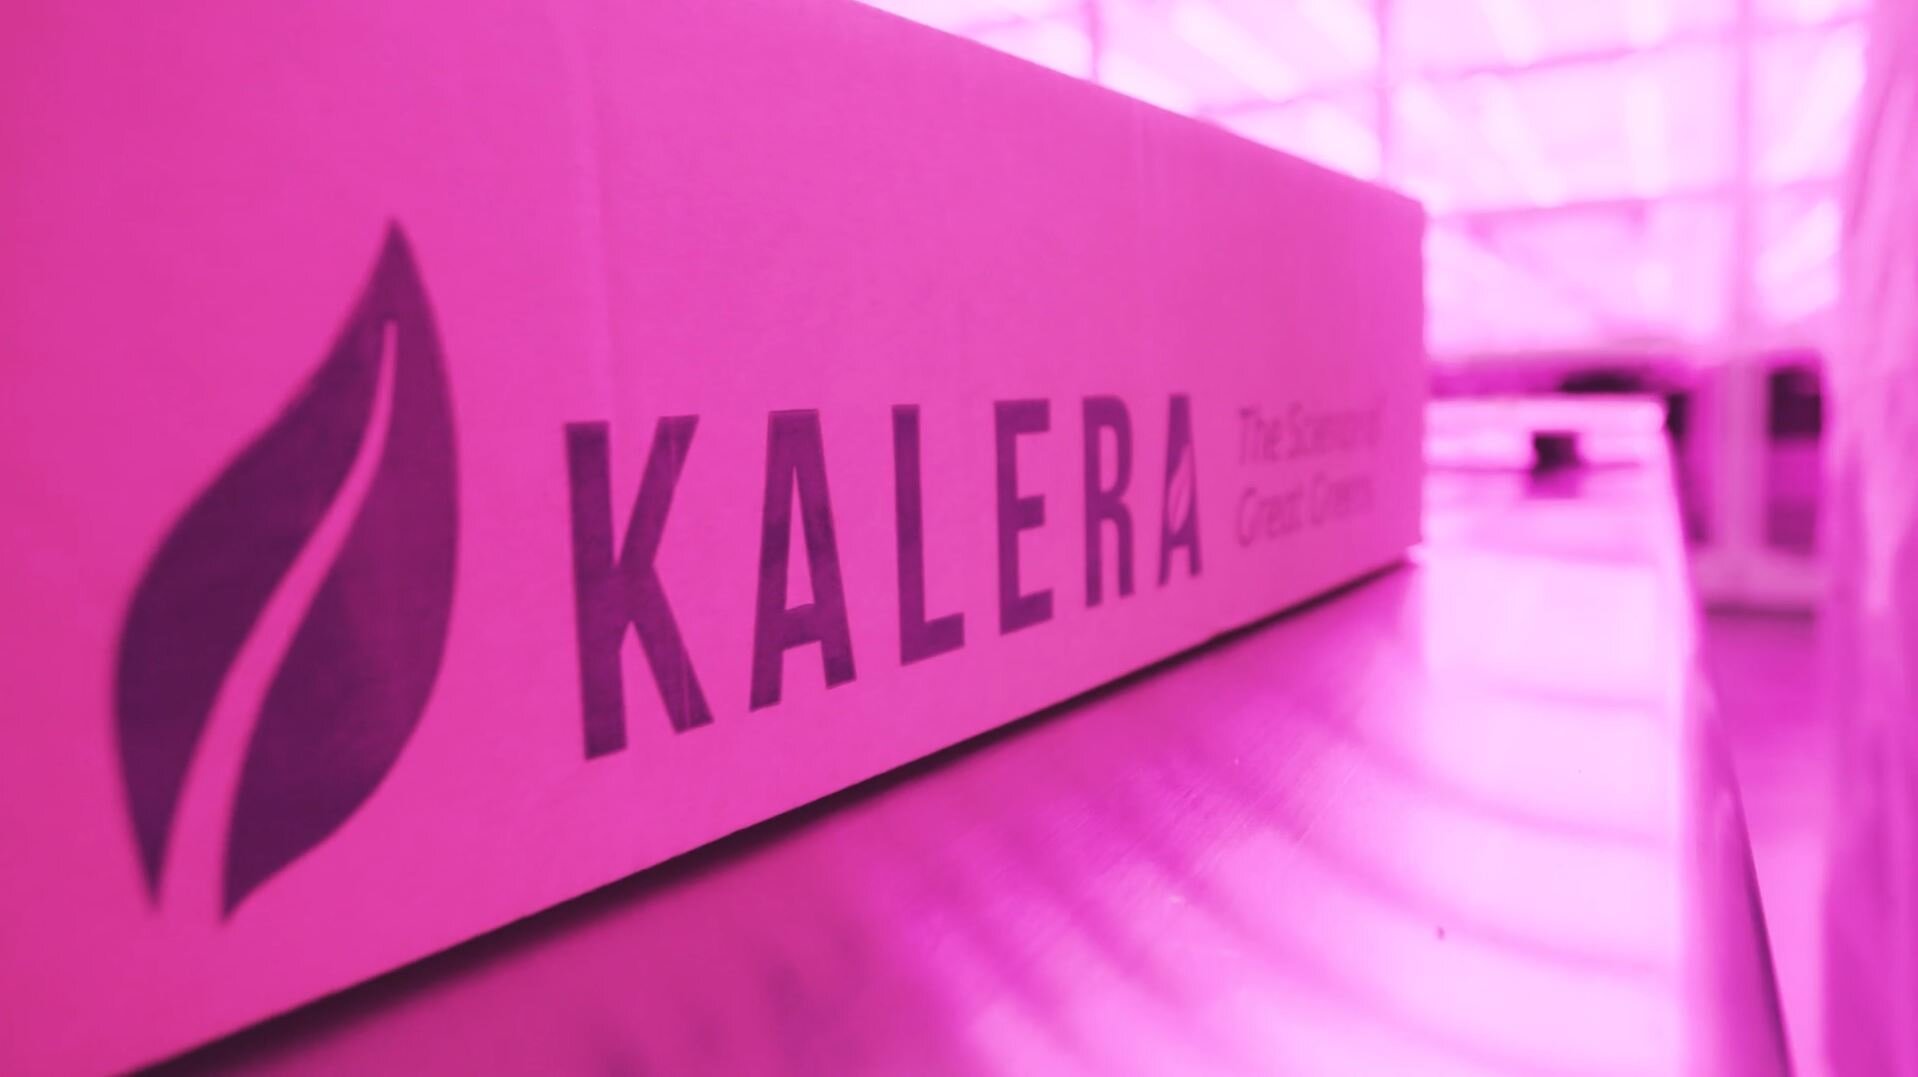 Kalera's new farm in Houston will be the largest such facility in Texas. Photo courtesy of Kalera